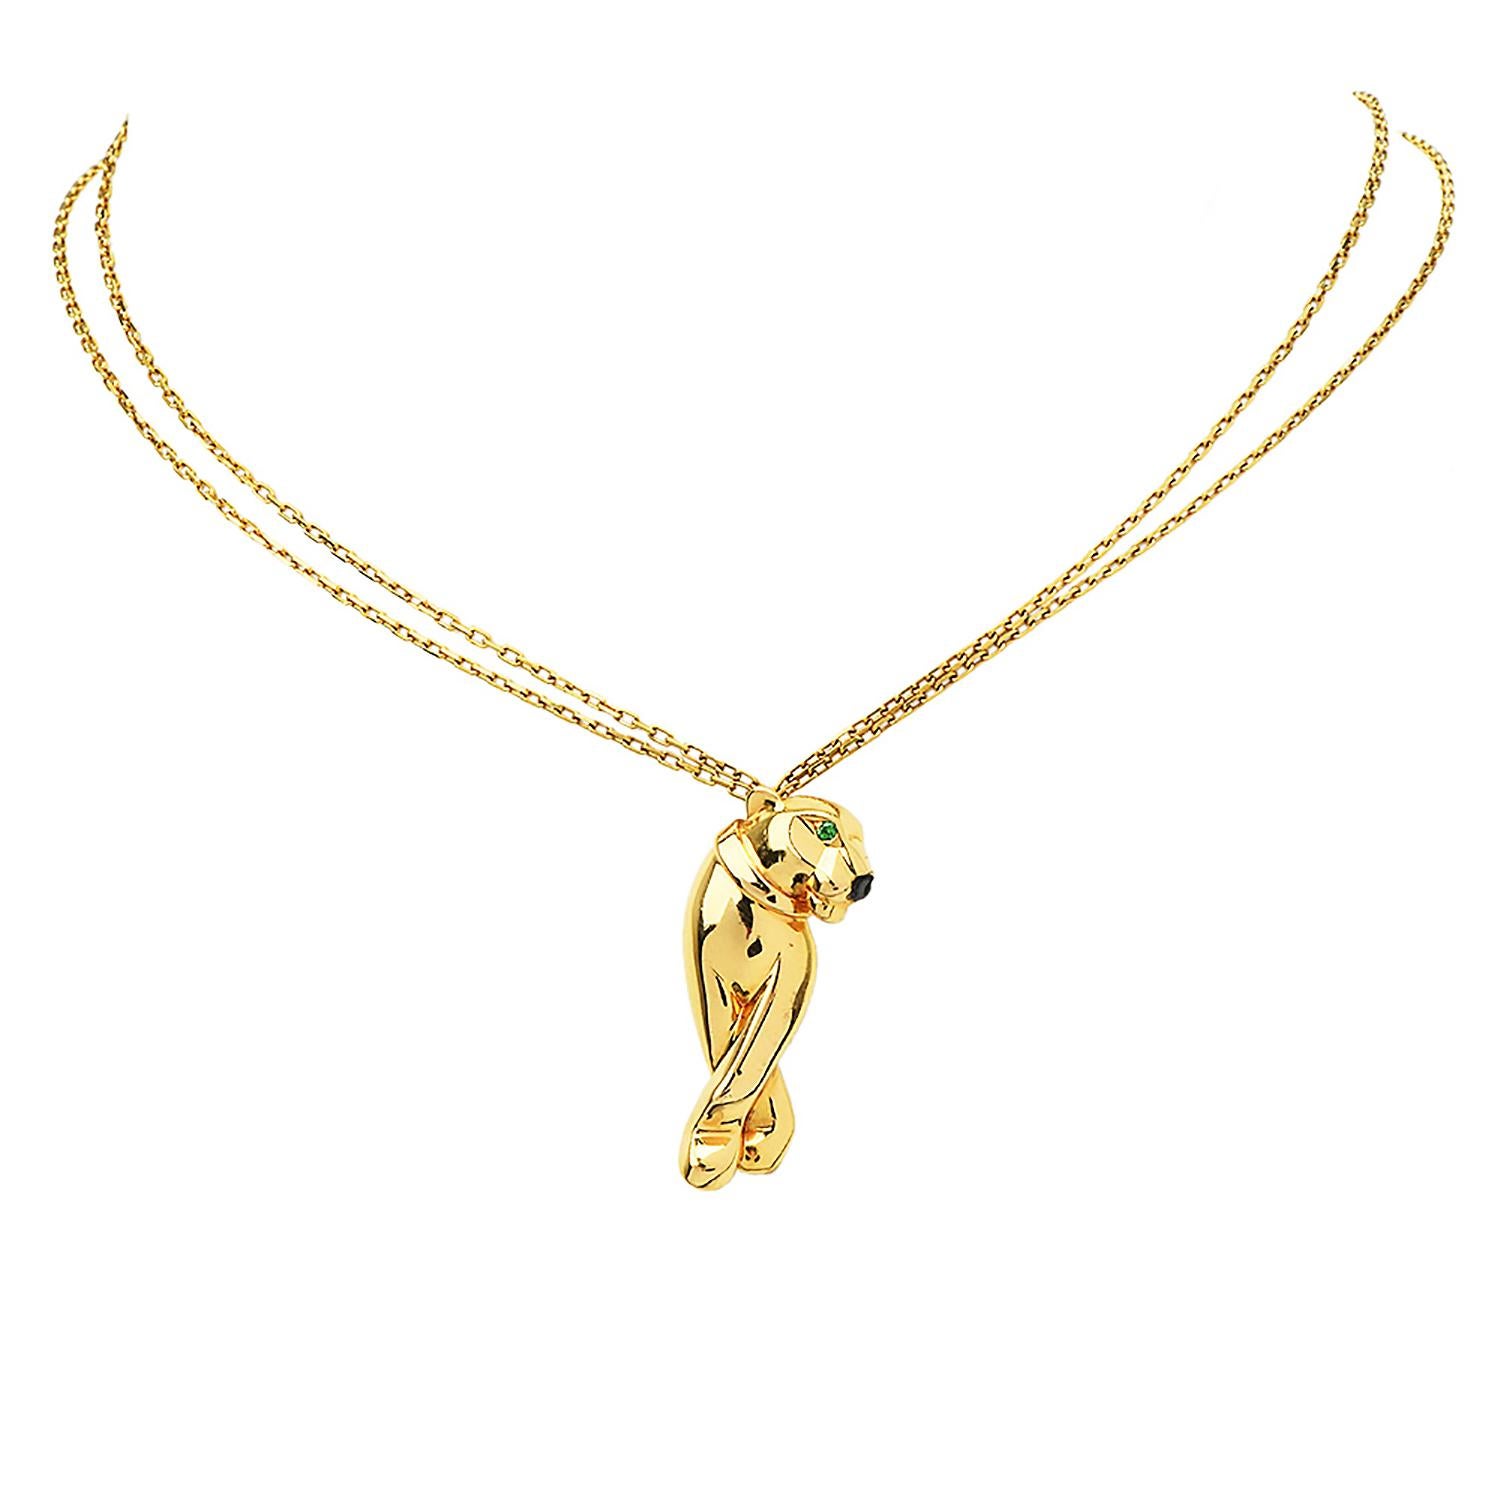 Panthere de Cartier is an exquisite piece inspired by the classic panther face design, pendant & Necklace.

Crafted in solid 18K Yellow Gold, the eyes are made of 2 Tsavorites, round-cut weighing collectively 0.03 carats.

The nose is created